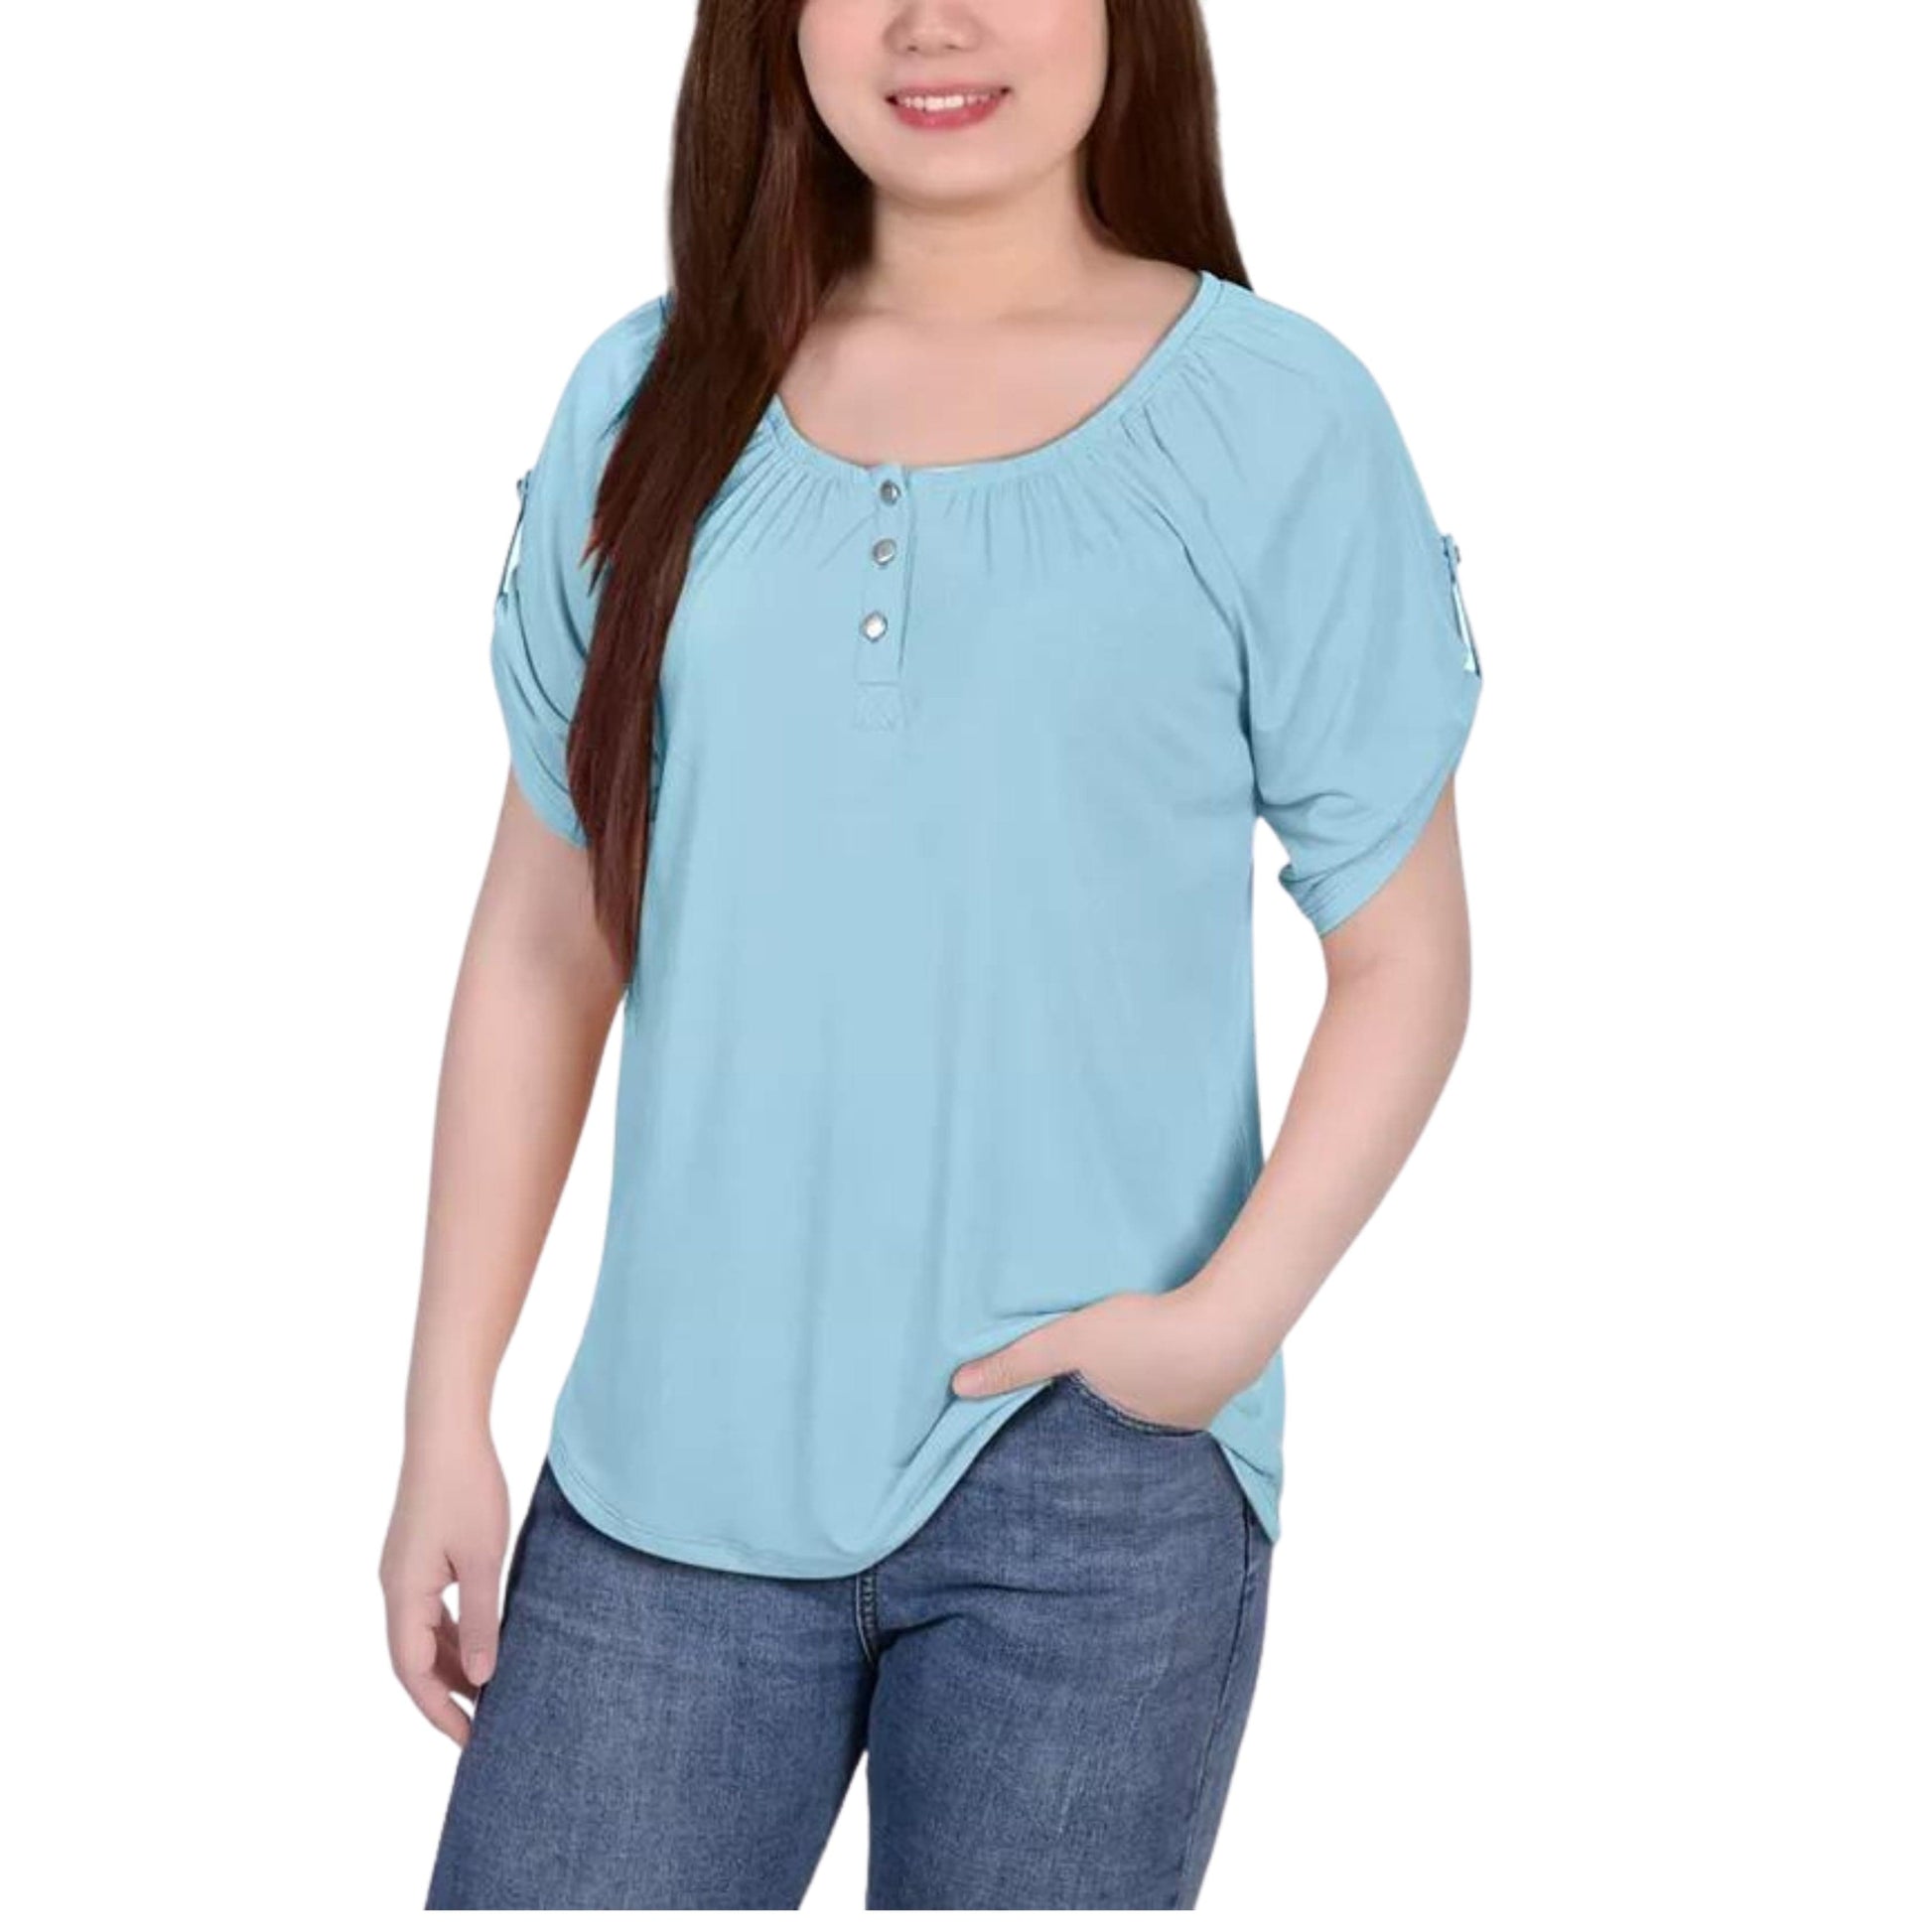 NY COLLECTION Womens Tops L / Blue NY COLLECTION - Off the Shoulder Blouse